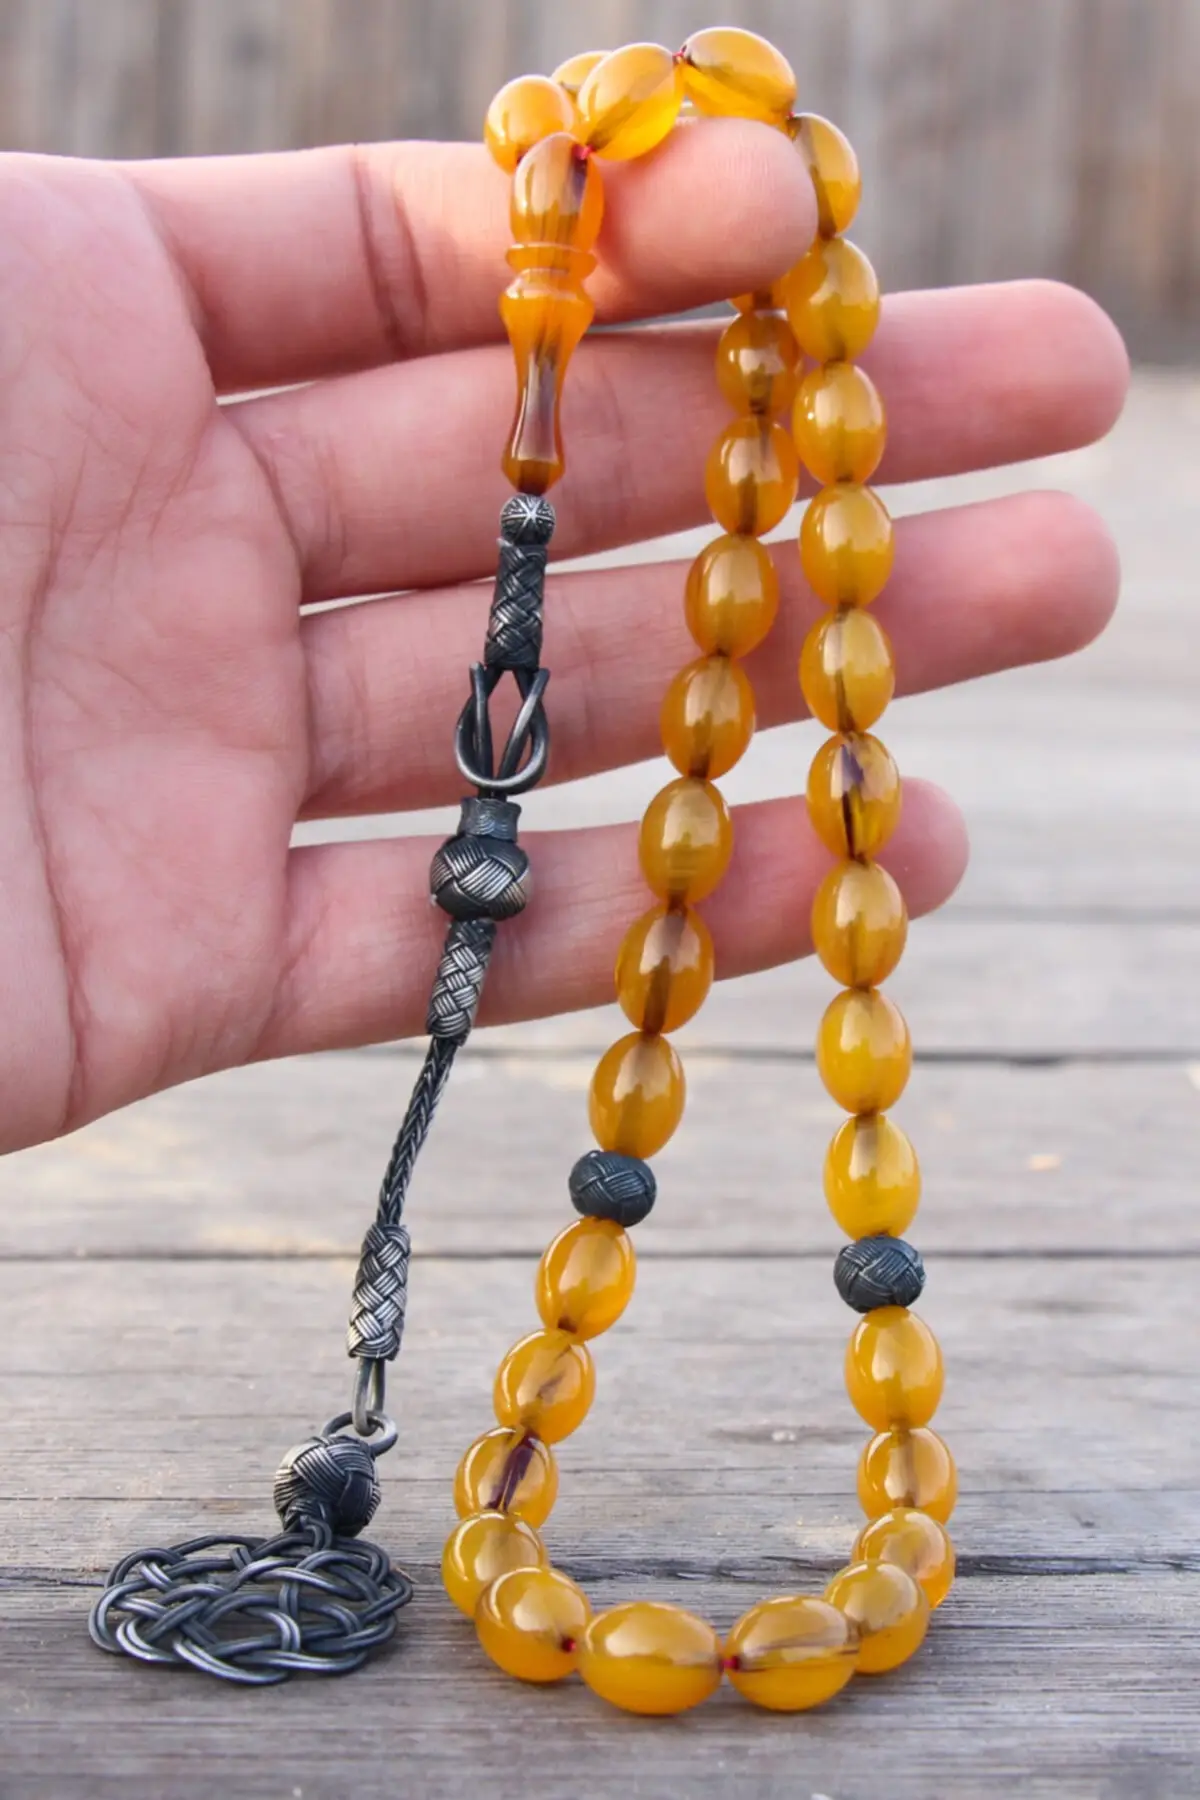 

Silver Tasseled Fire Amber Tasbih Rosary Is The Most Beautiful And Original Access Very Special 33 Stone Muslim Islam Worship